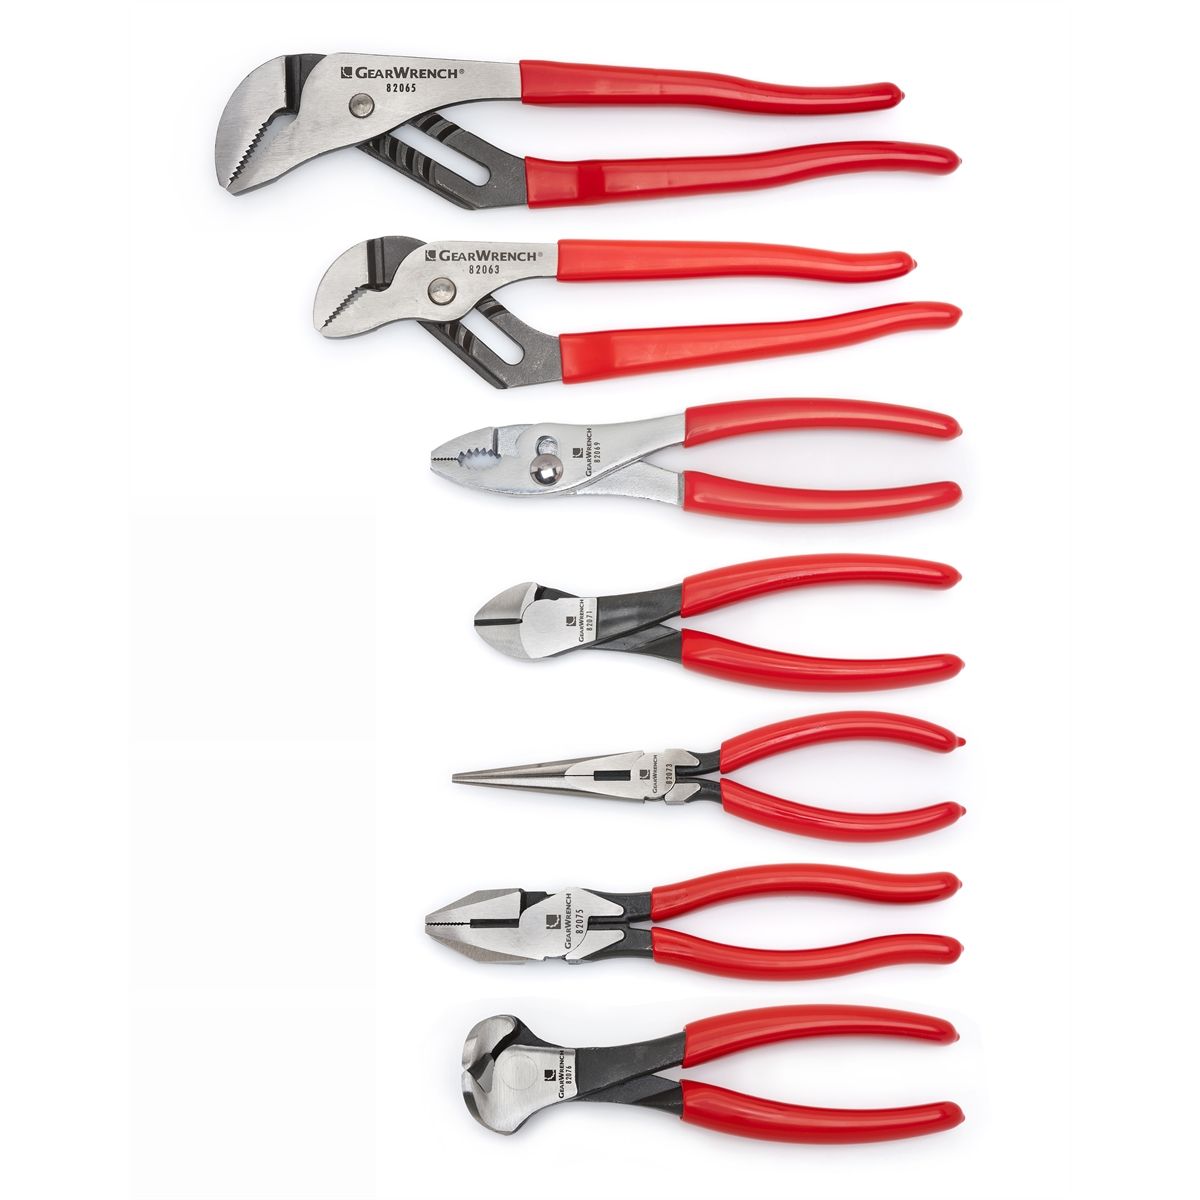 Long Needle Nose Pliers with Synthetic Handle